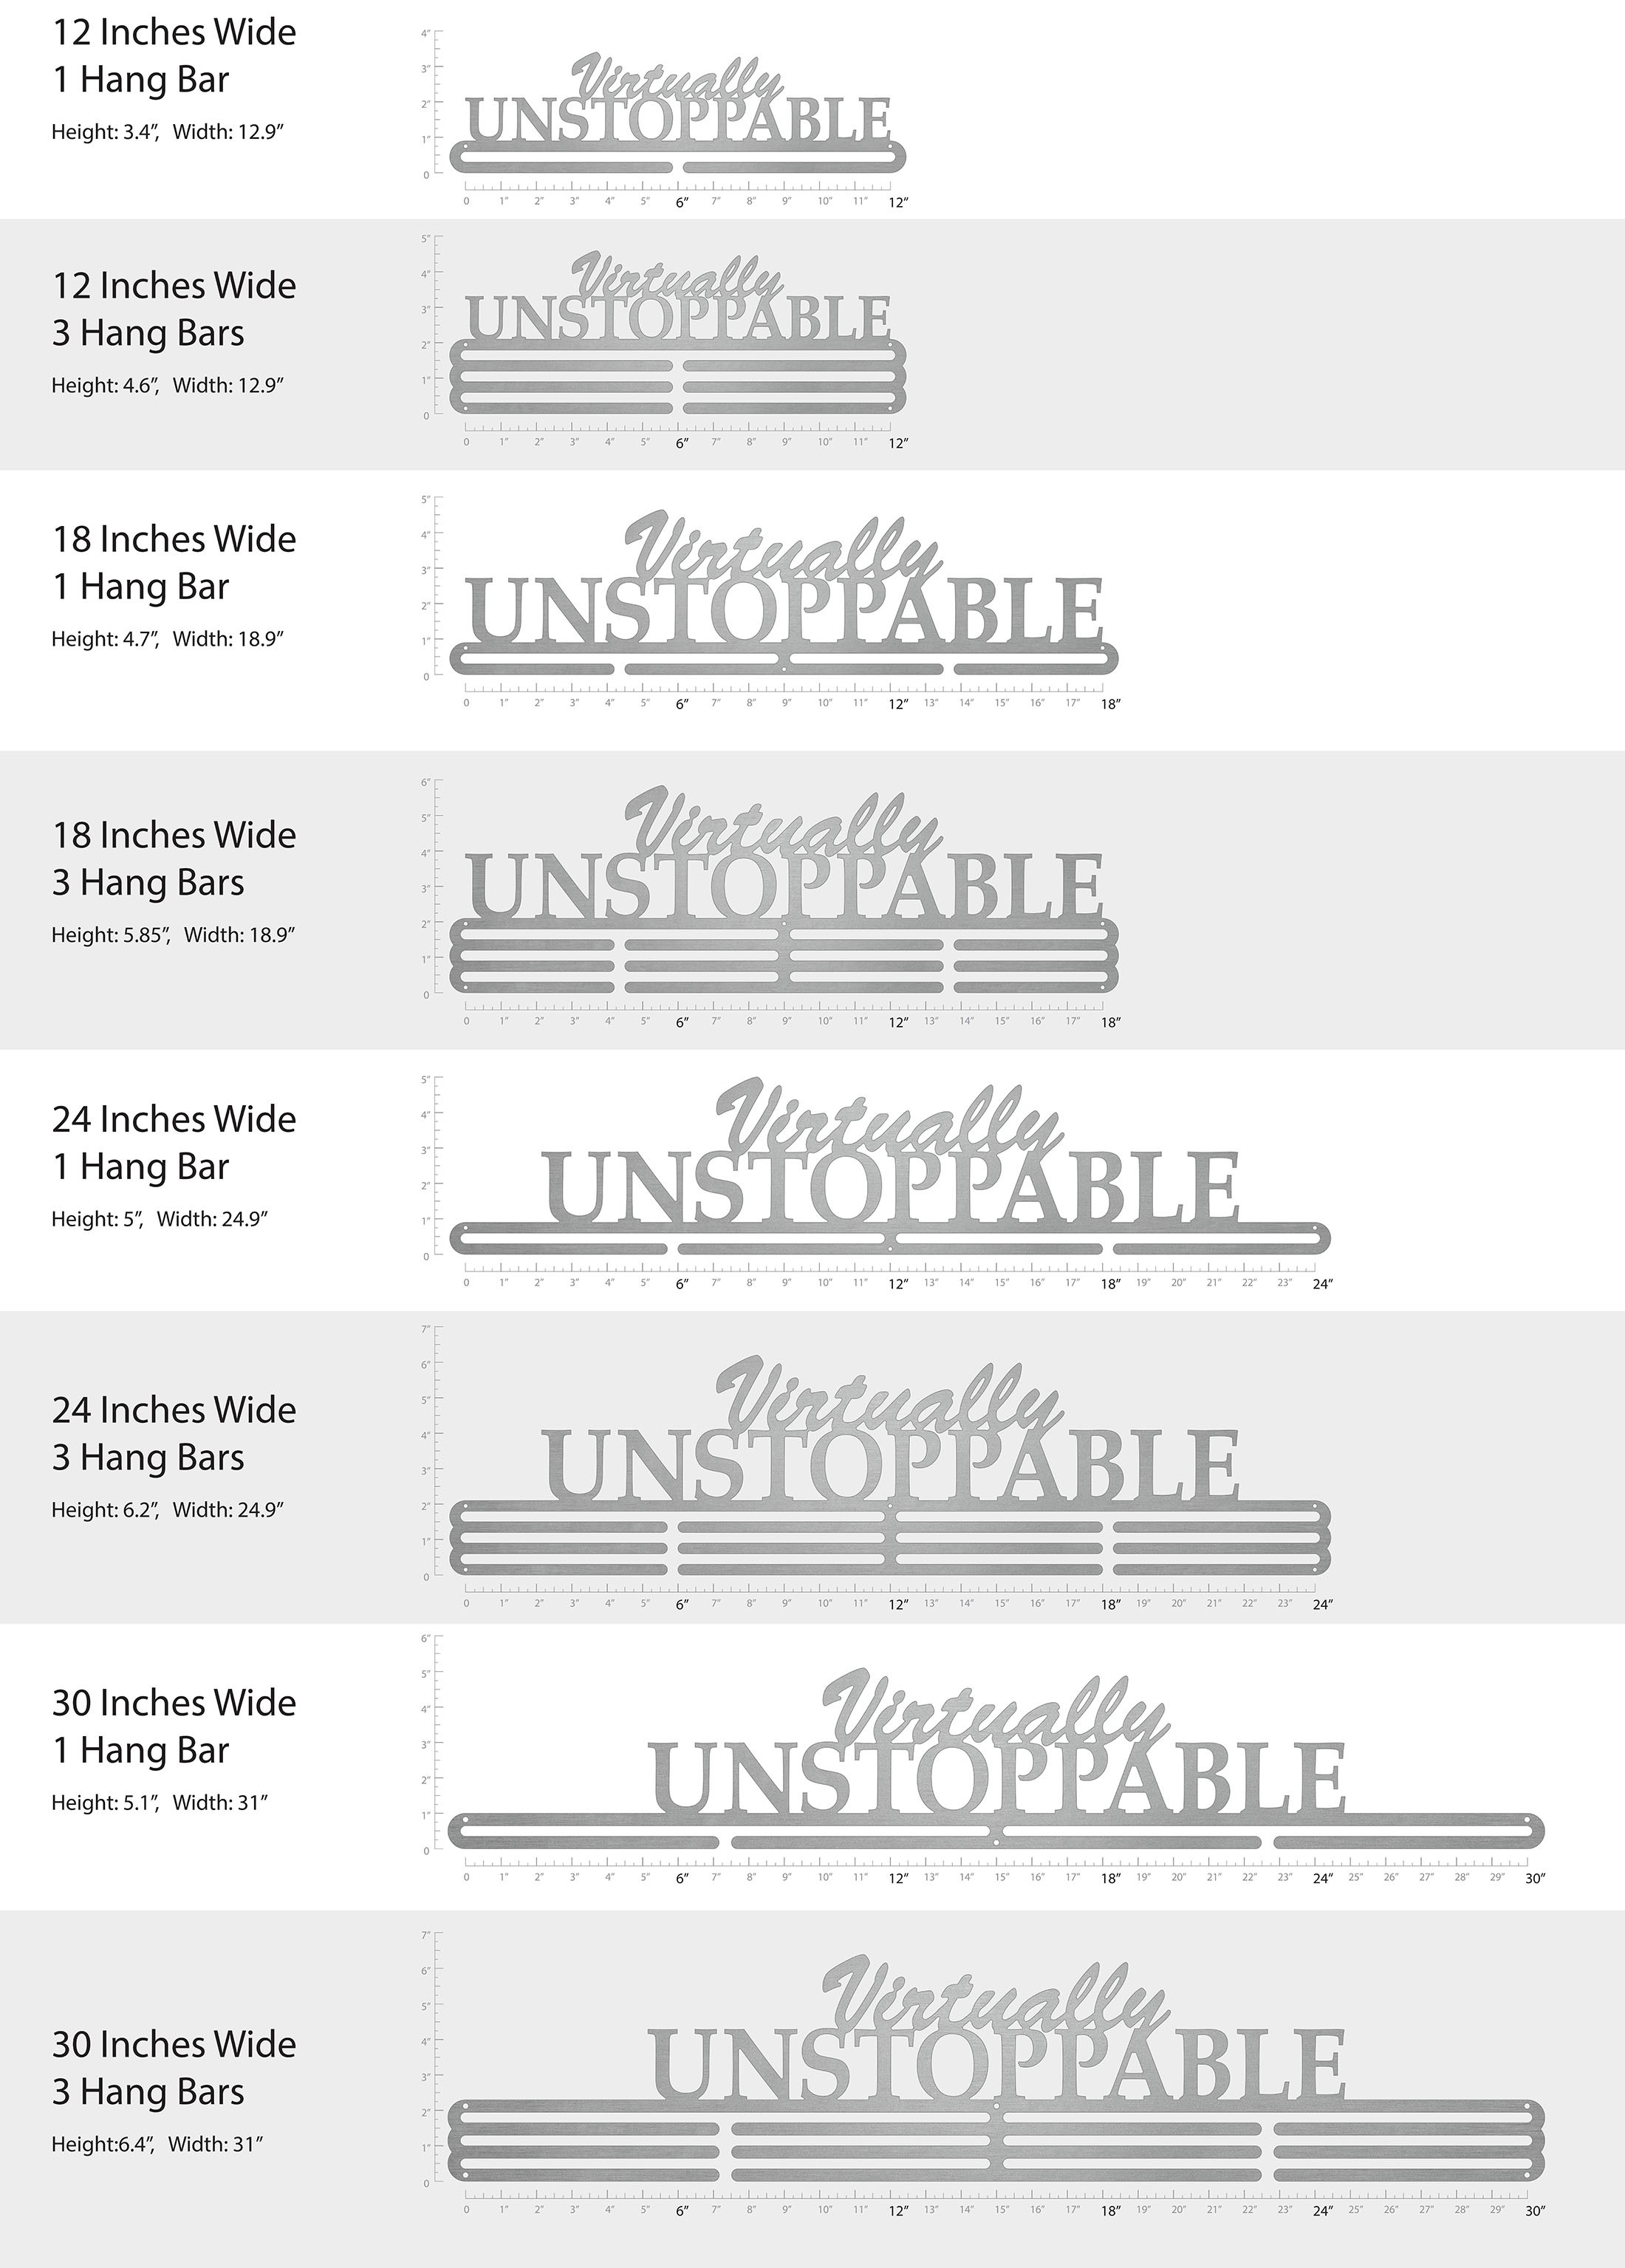 Virtually Unstoppable - Text Only